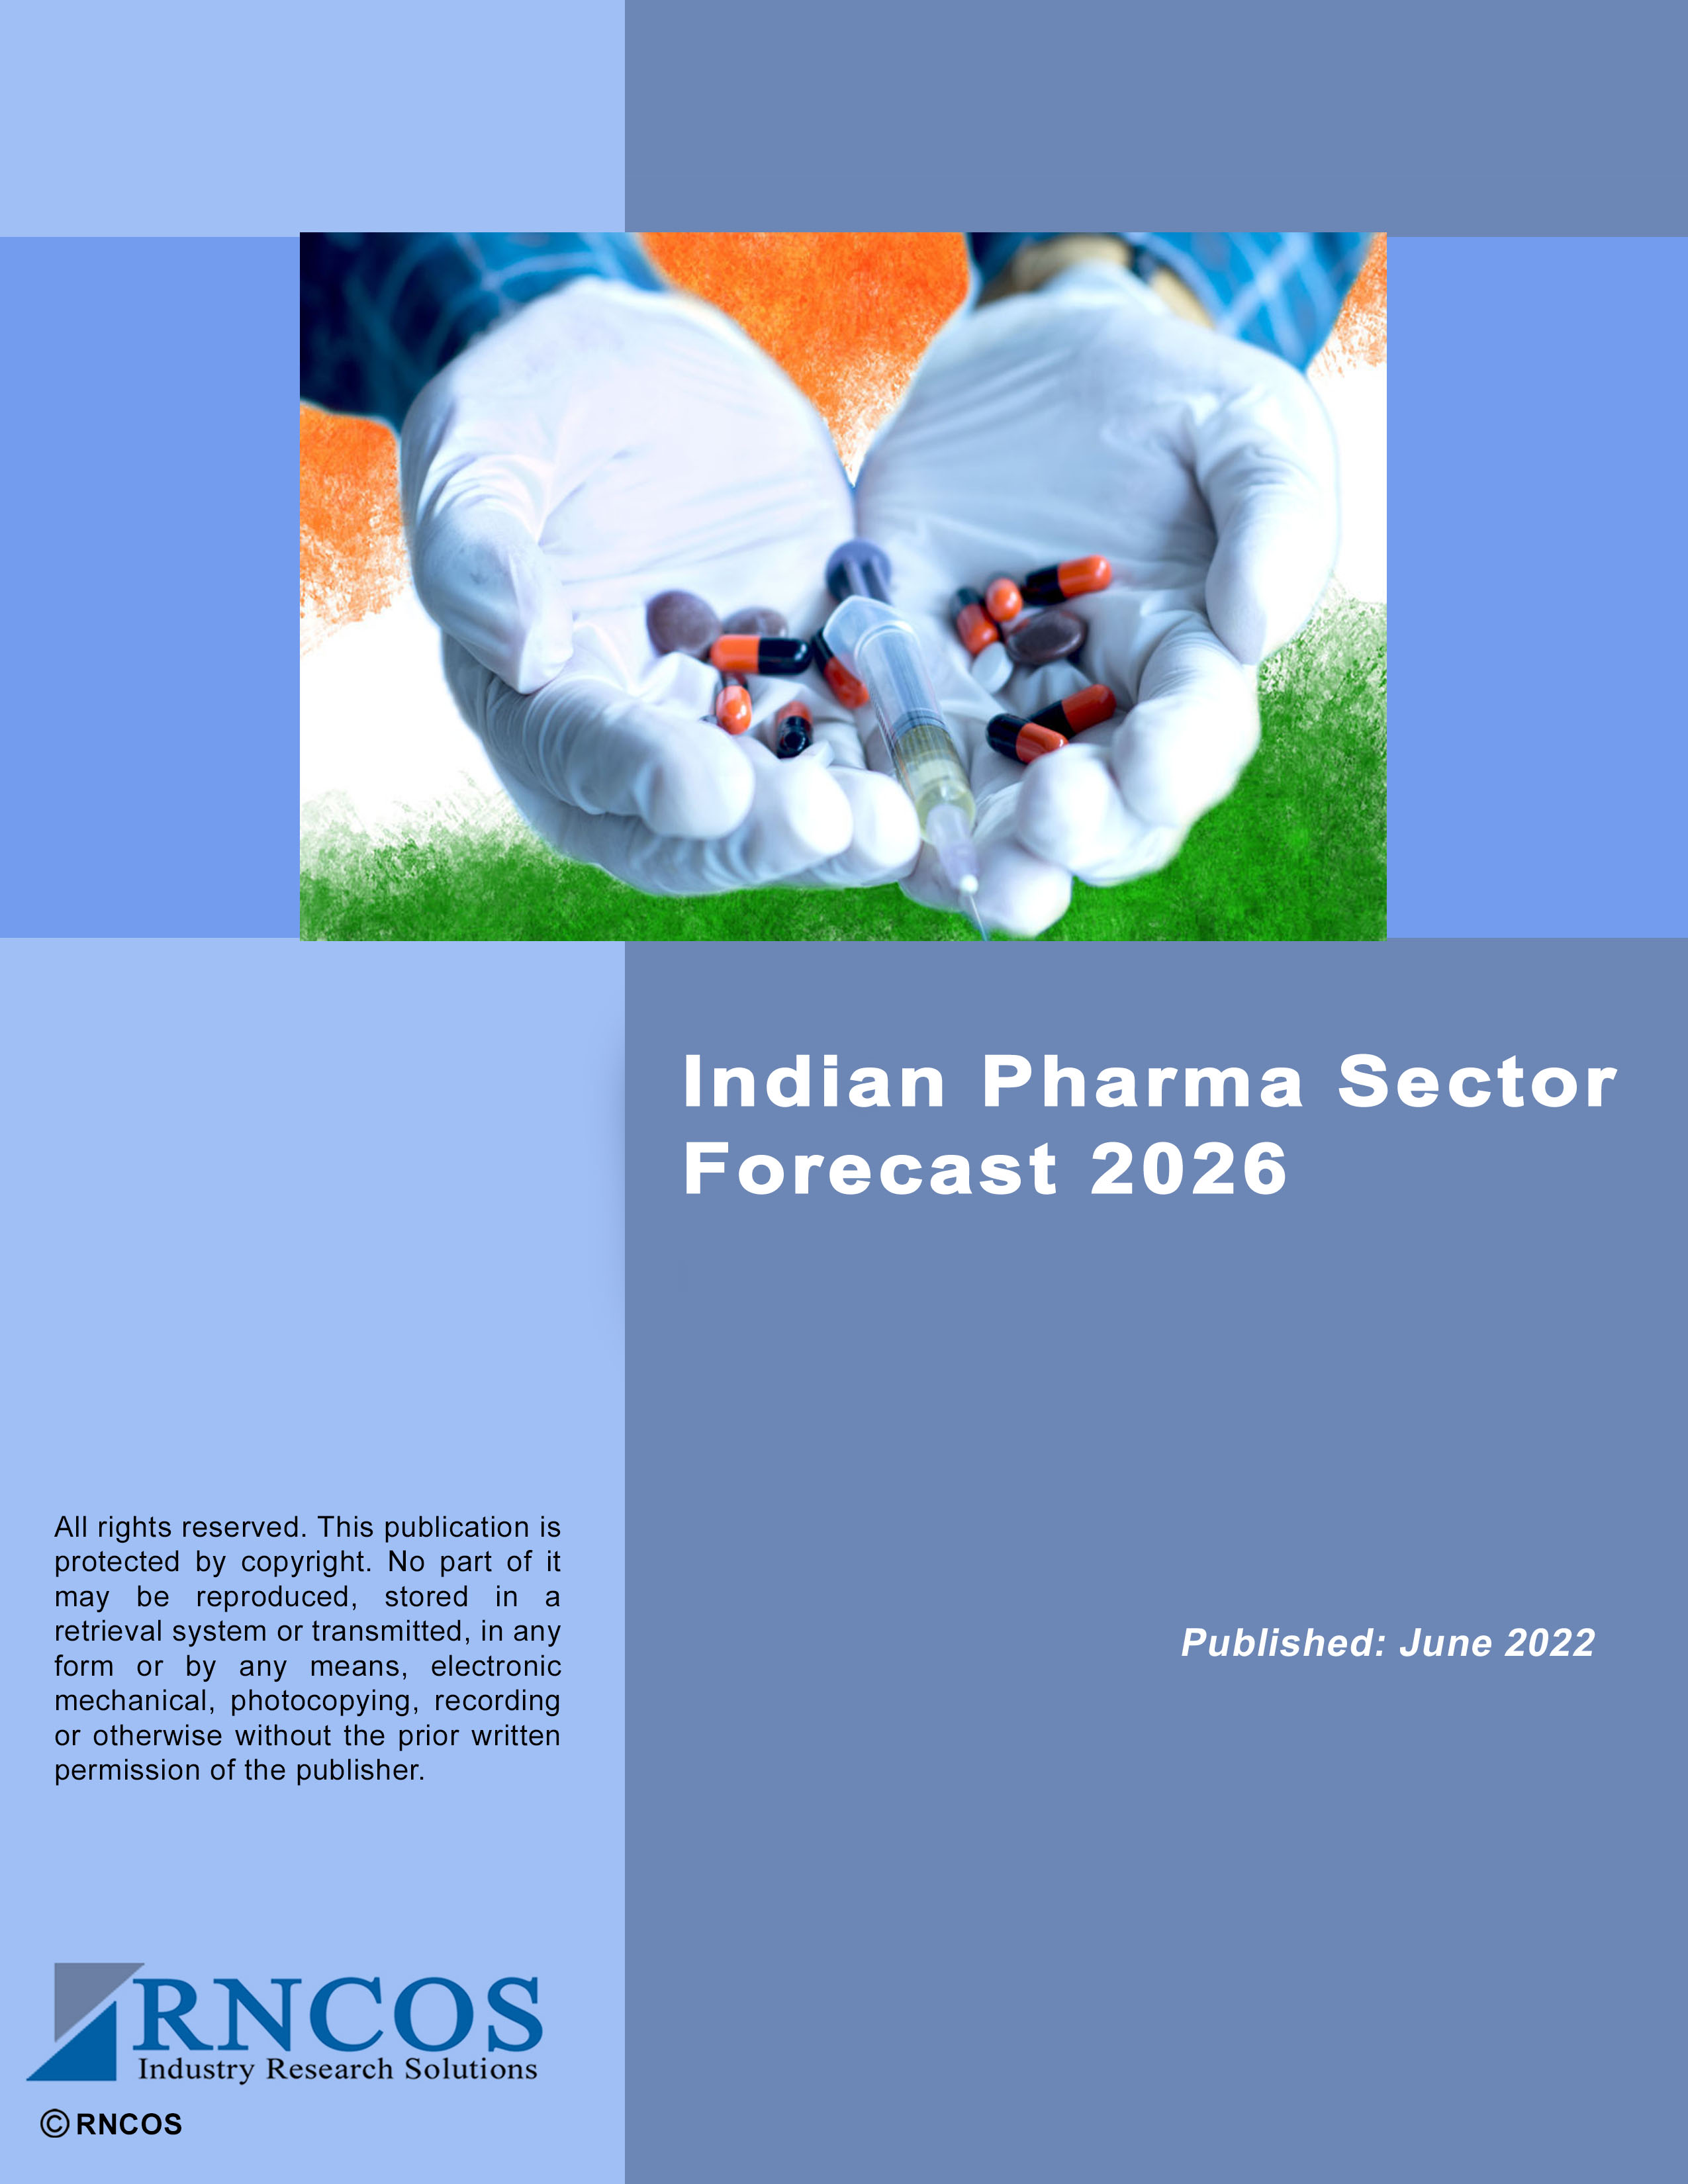 Indian Pharma Sector Forecast 2026 Research Report